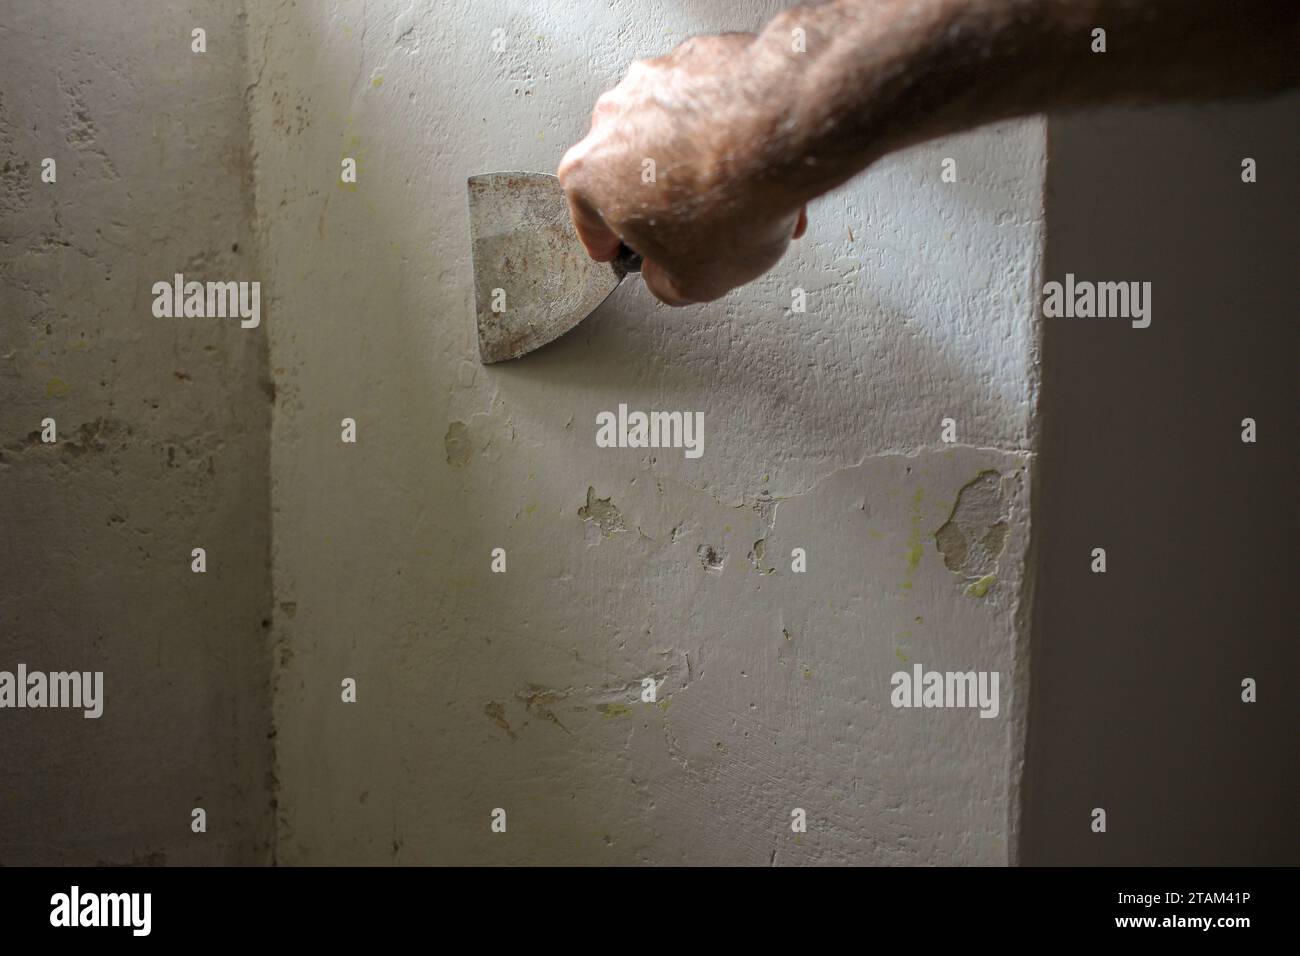 preparing a wall with a spatula to paint it white afterwards Stock Photo